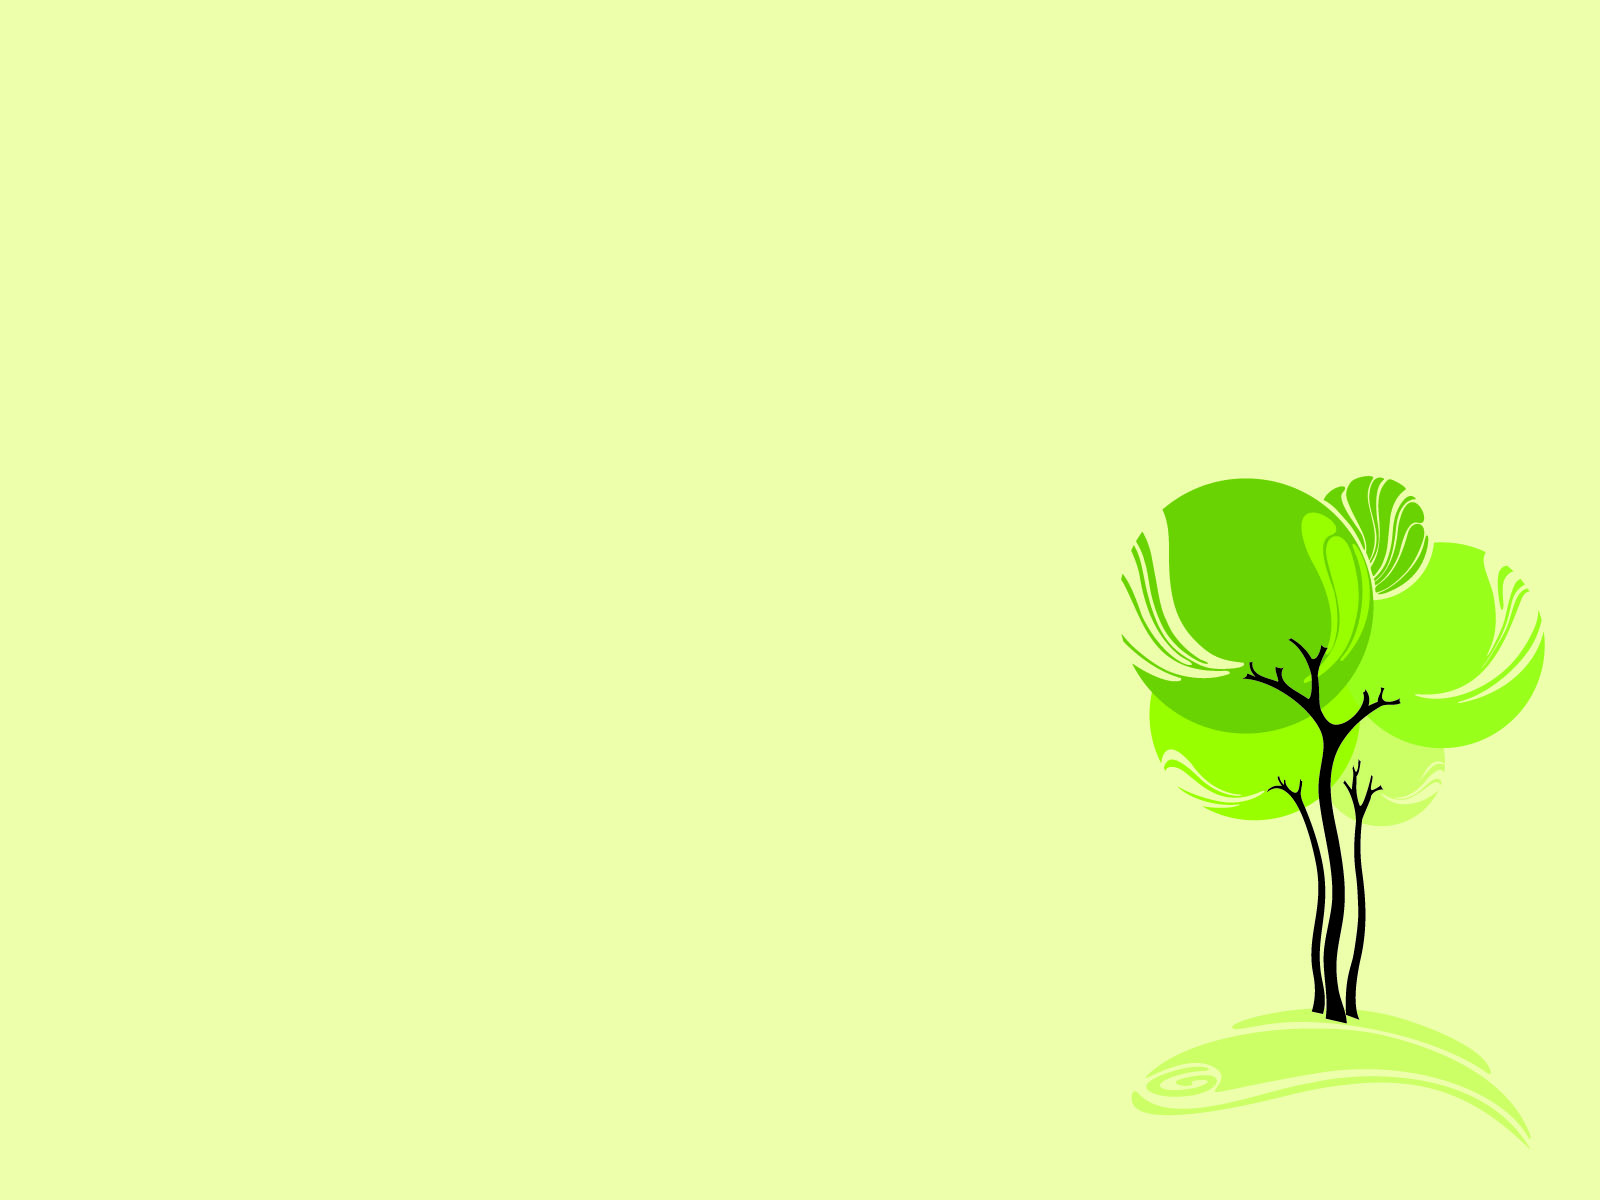 tree Backgrounds - PPT Backgrounds